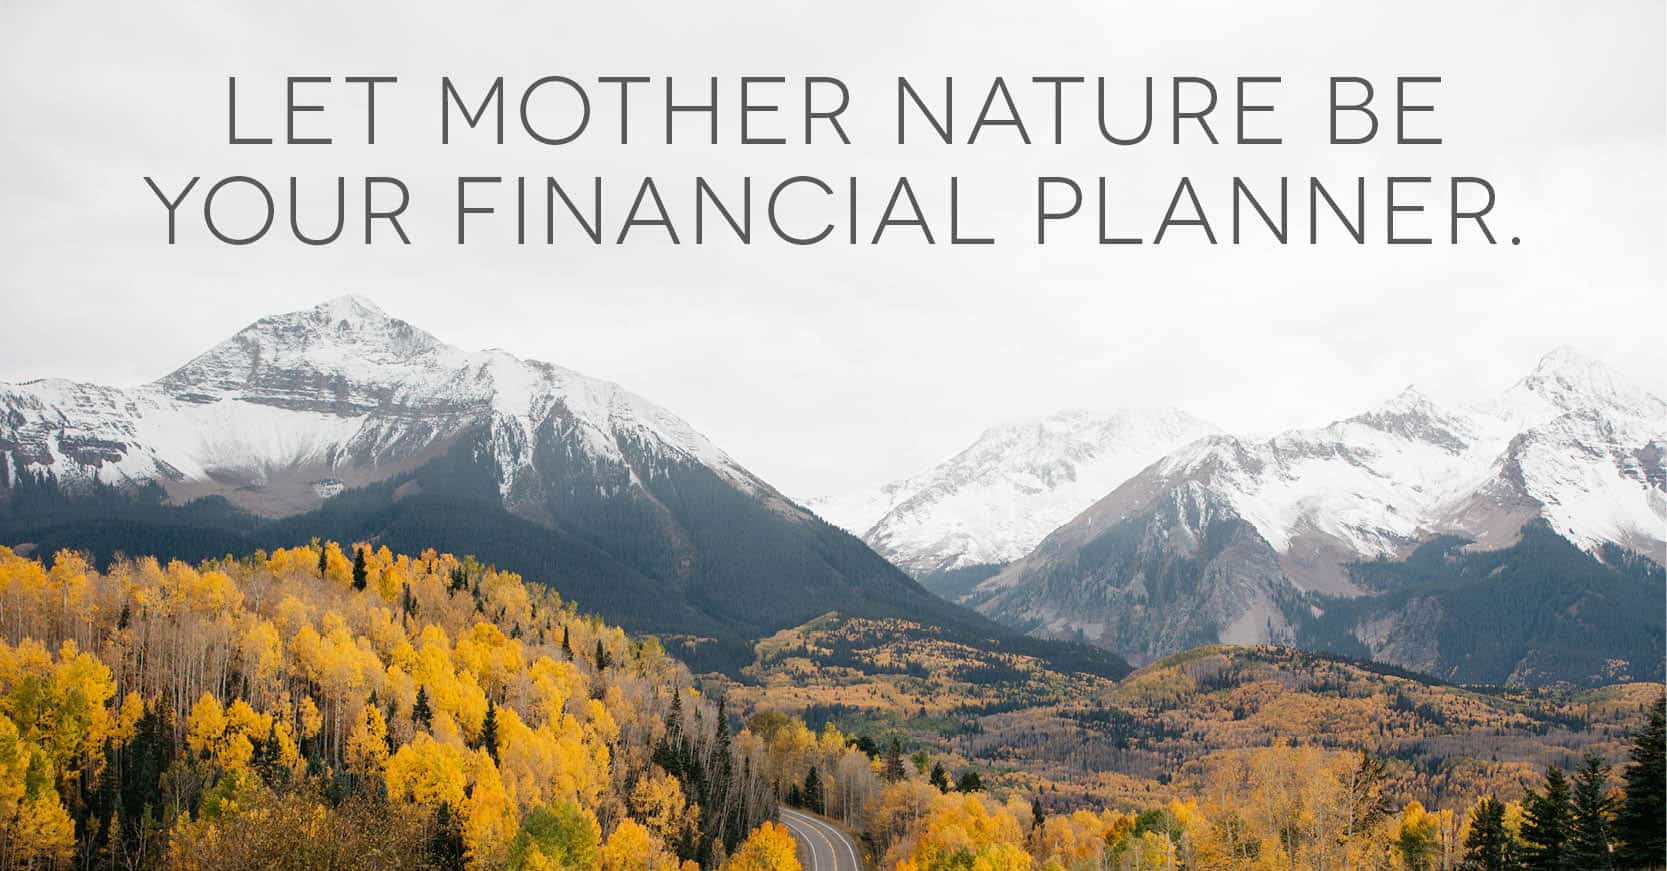 let-mother-nature-be-your-financial-planner-free-download-kate-northrup